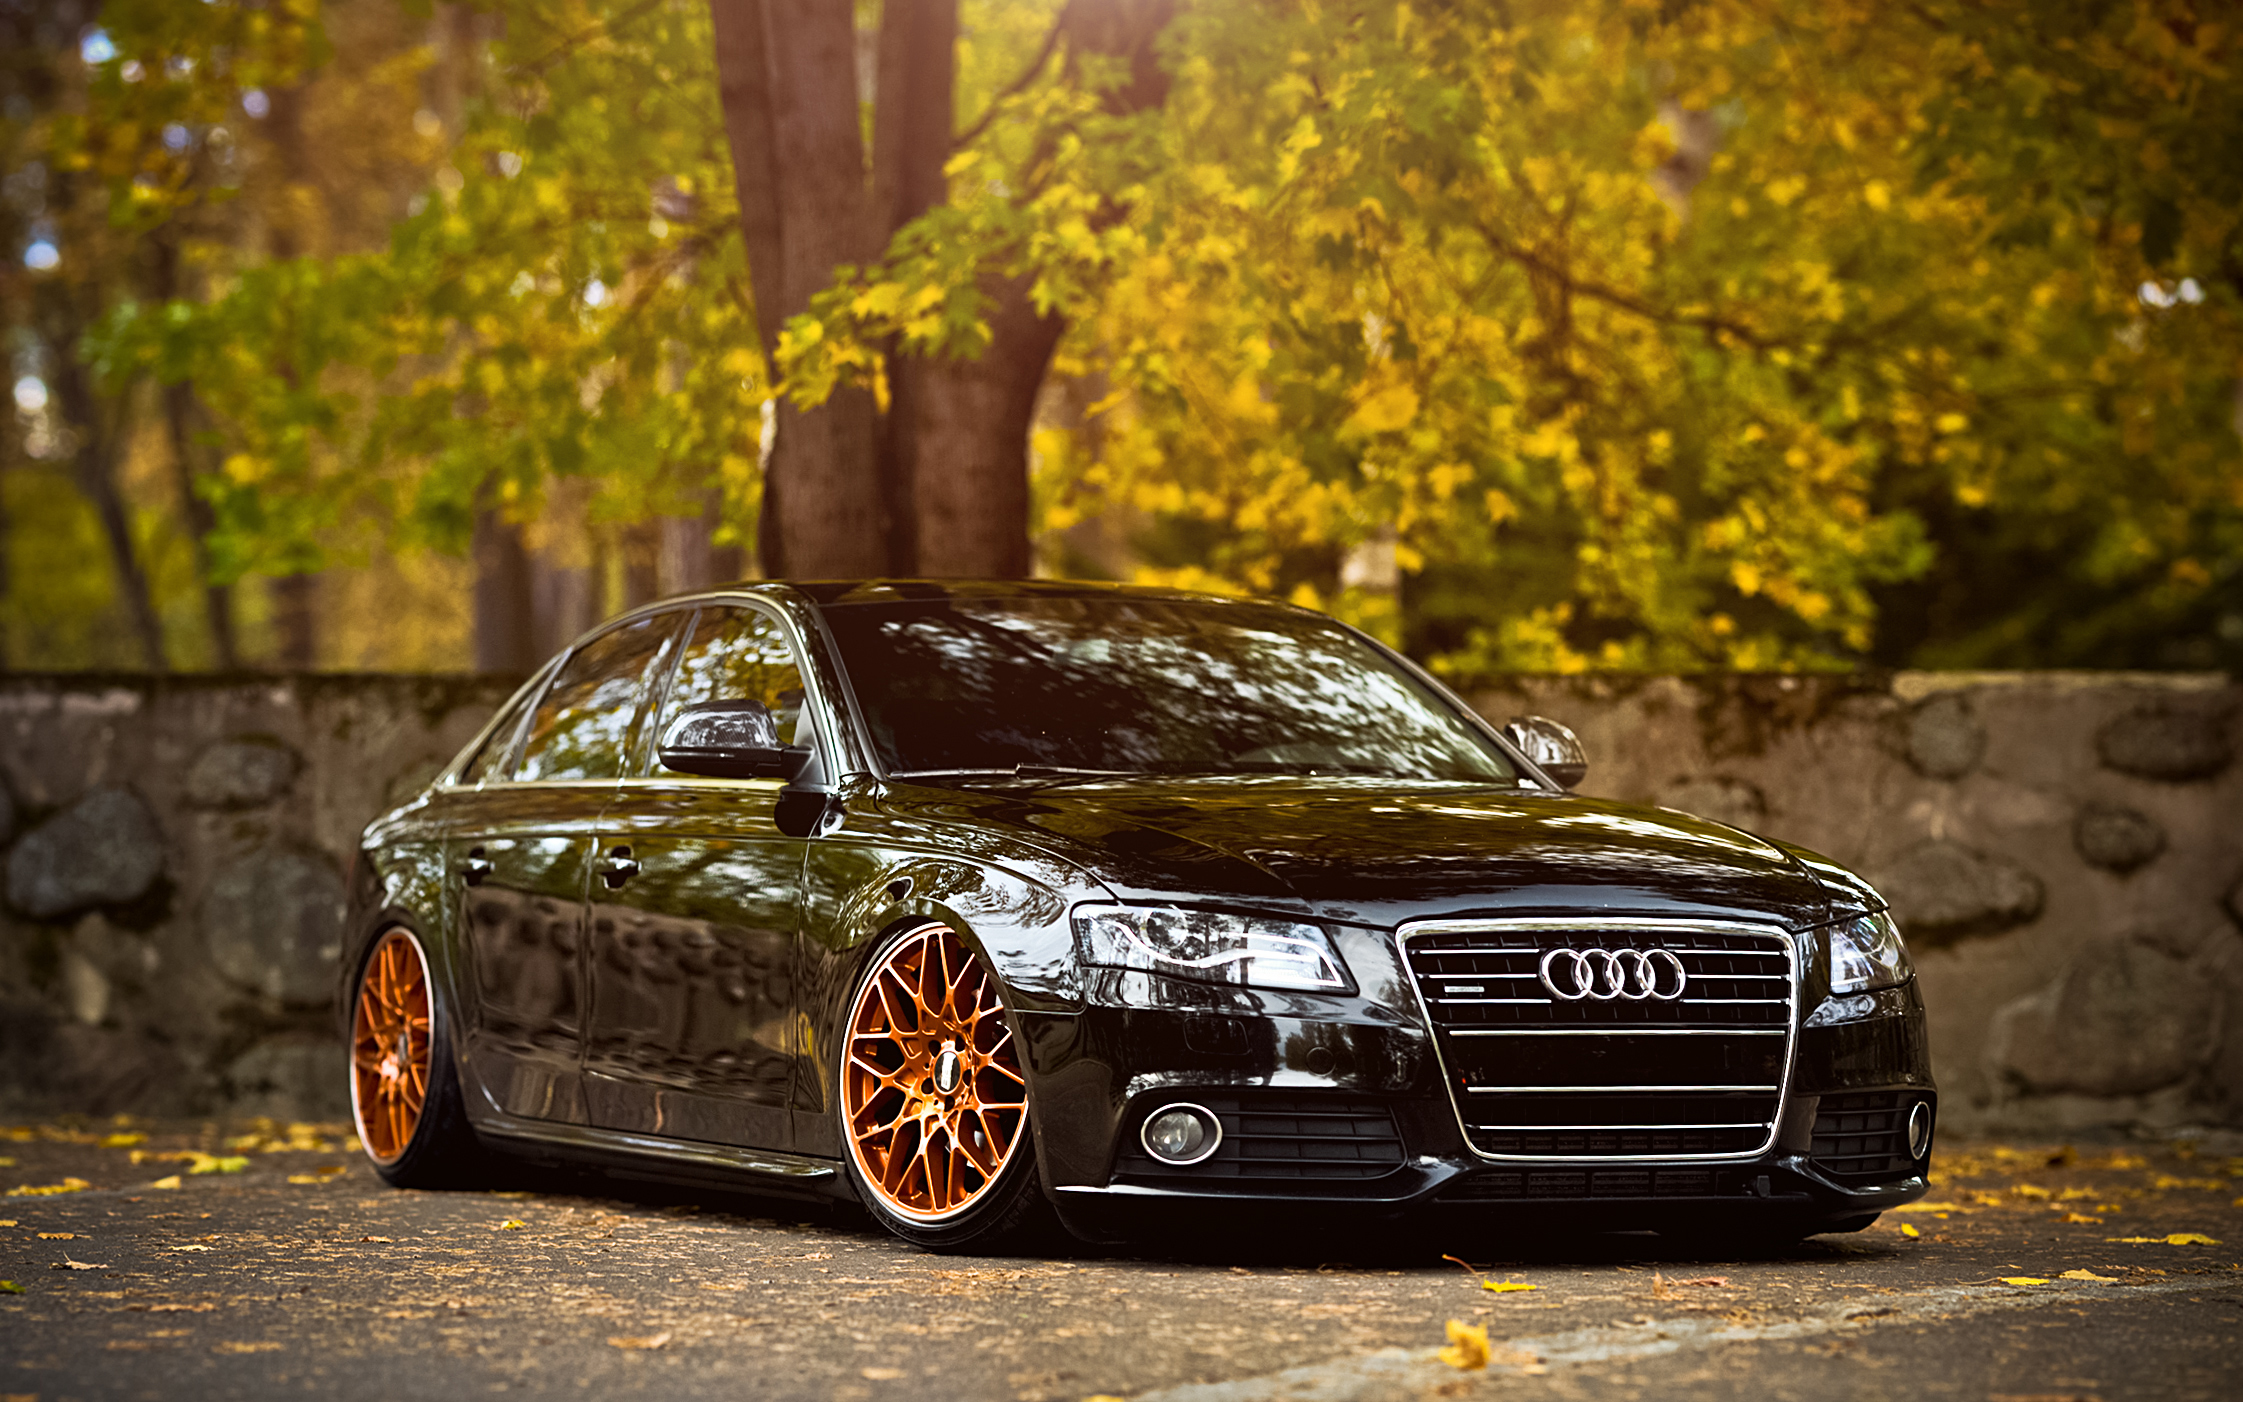 520+ Audi HD Wallpapers and Backgrounds